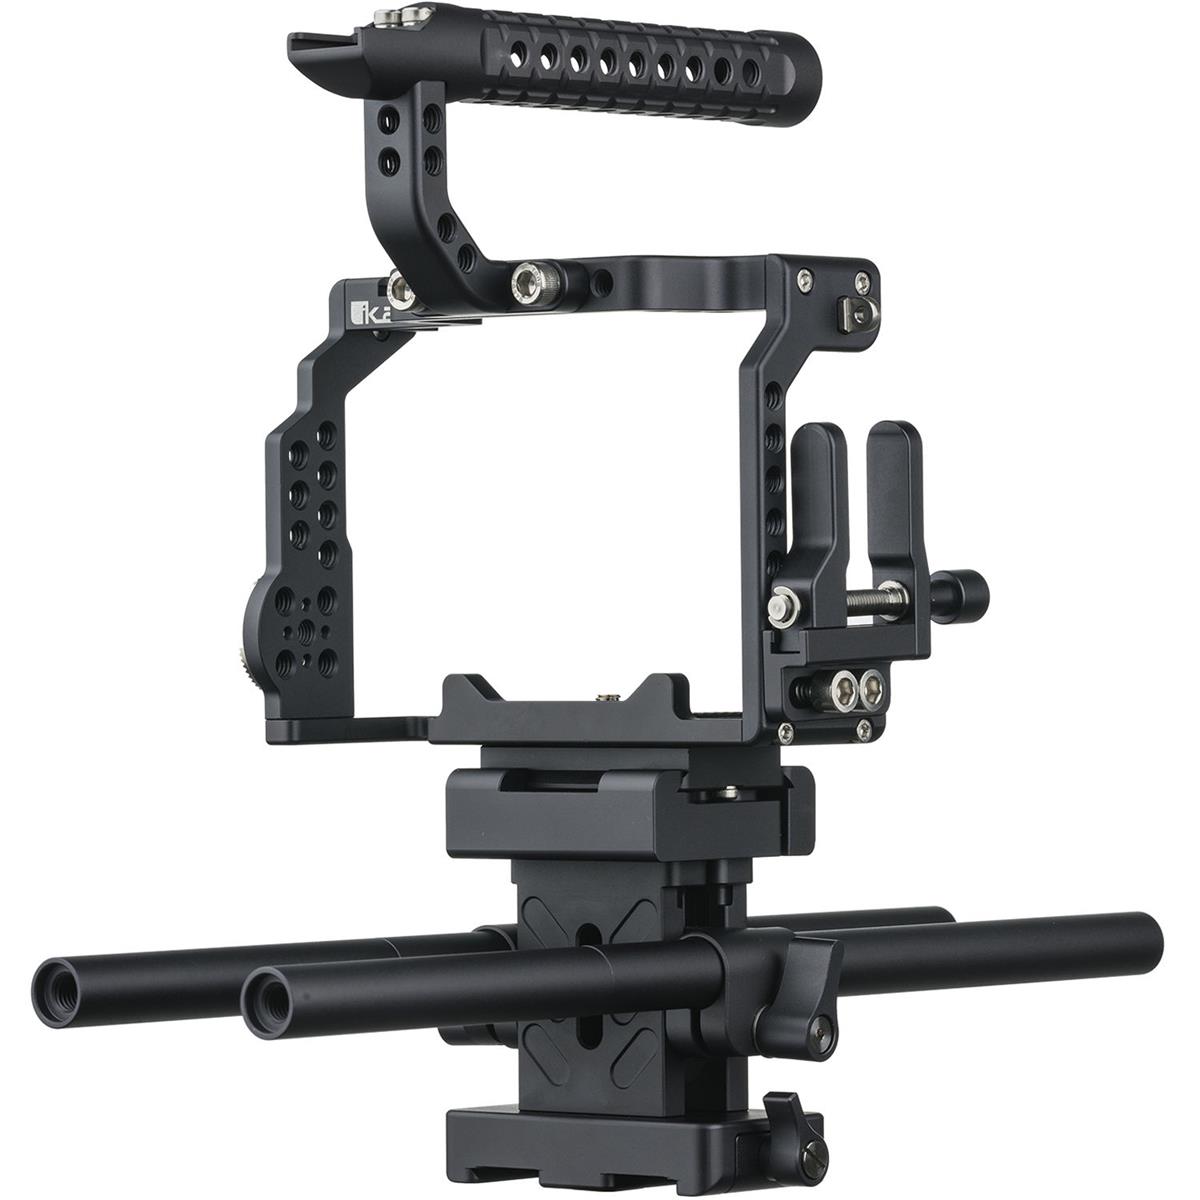 Image of Ikan STRATUS Complete Cage for Sony a7 III Series Cameras